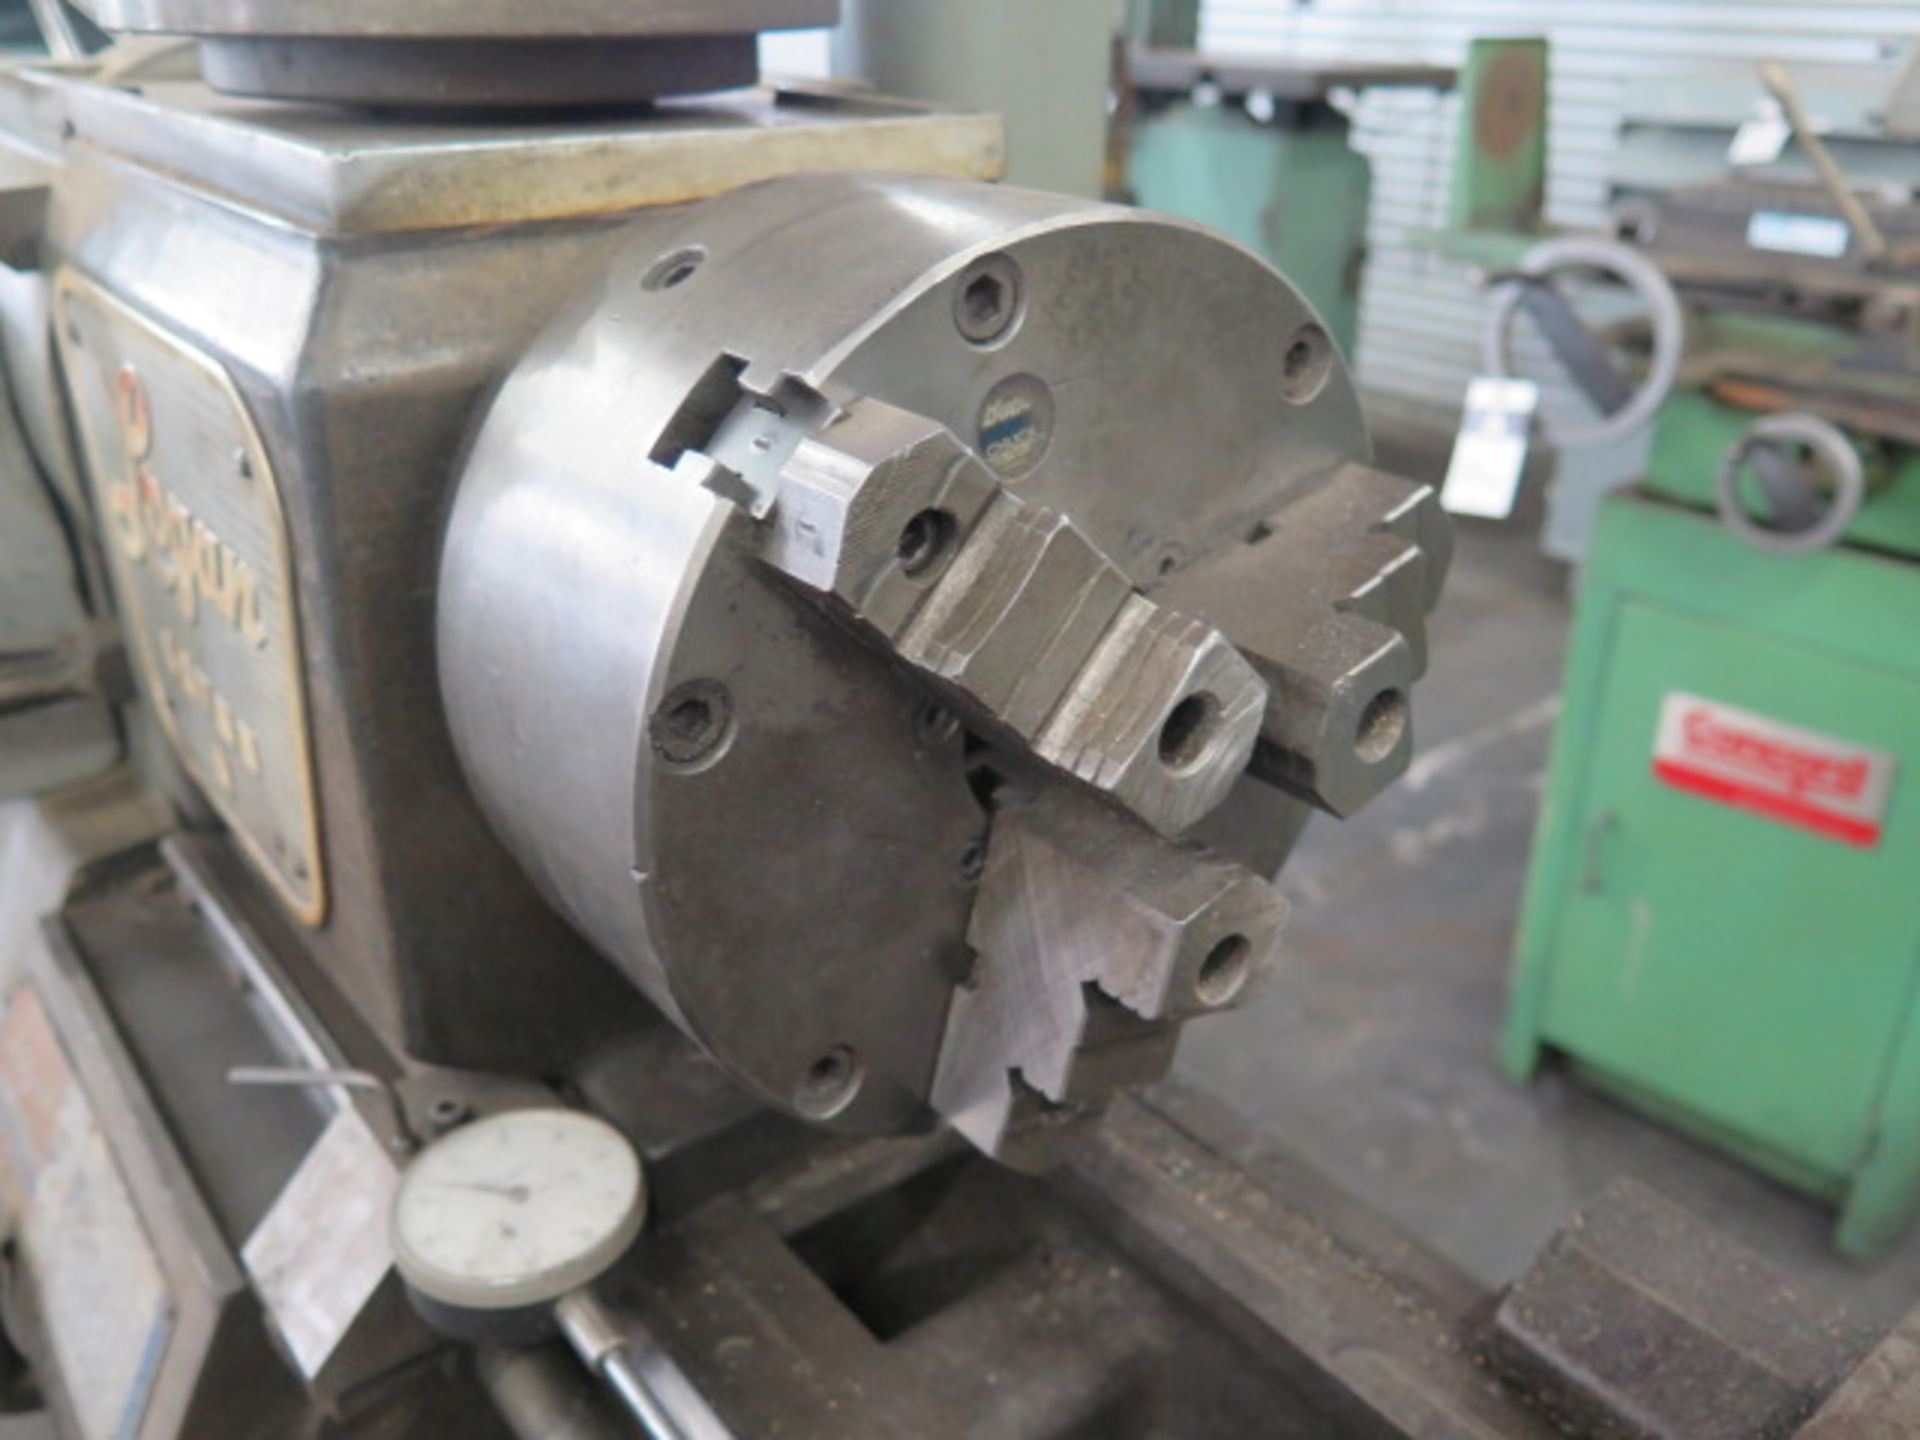 Logan mdl. 2535-2VH 12" x 24" Lathe s/n 83331 w/ 55-2000 Dial RPM, Inch Threading, Tailstock, 7 1/2" - Image 5 of 8